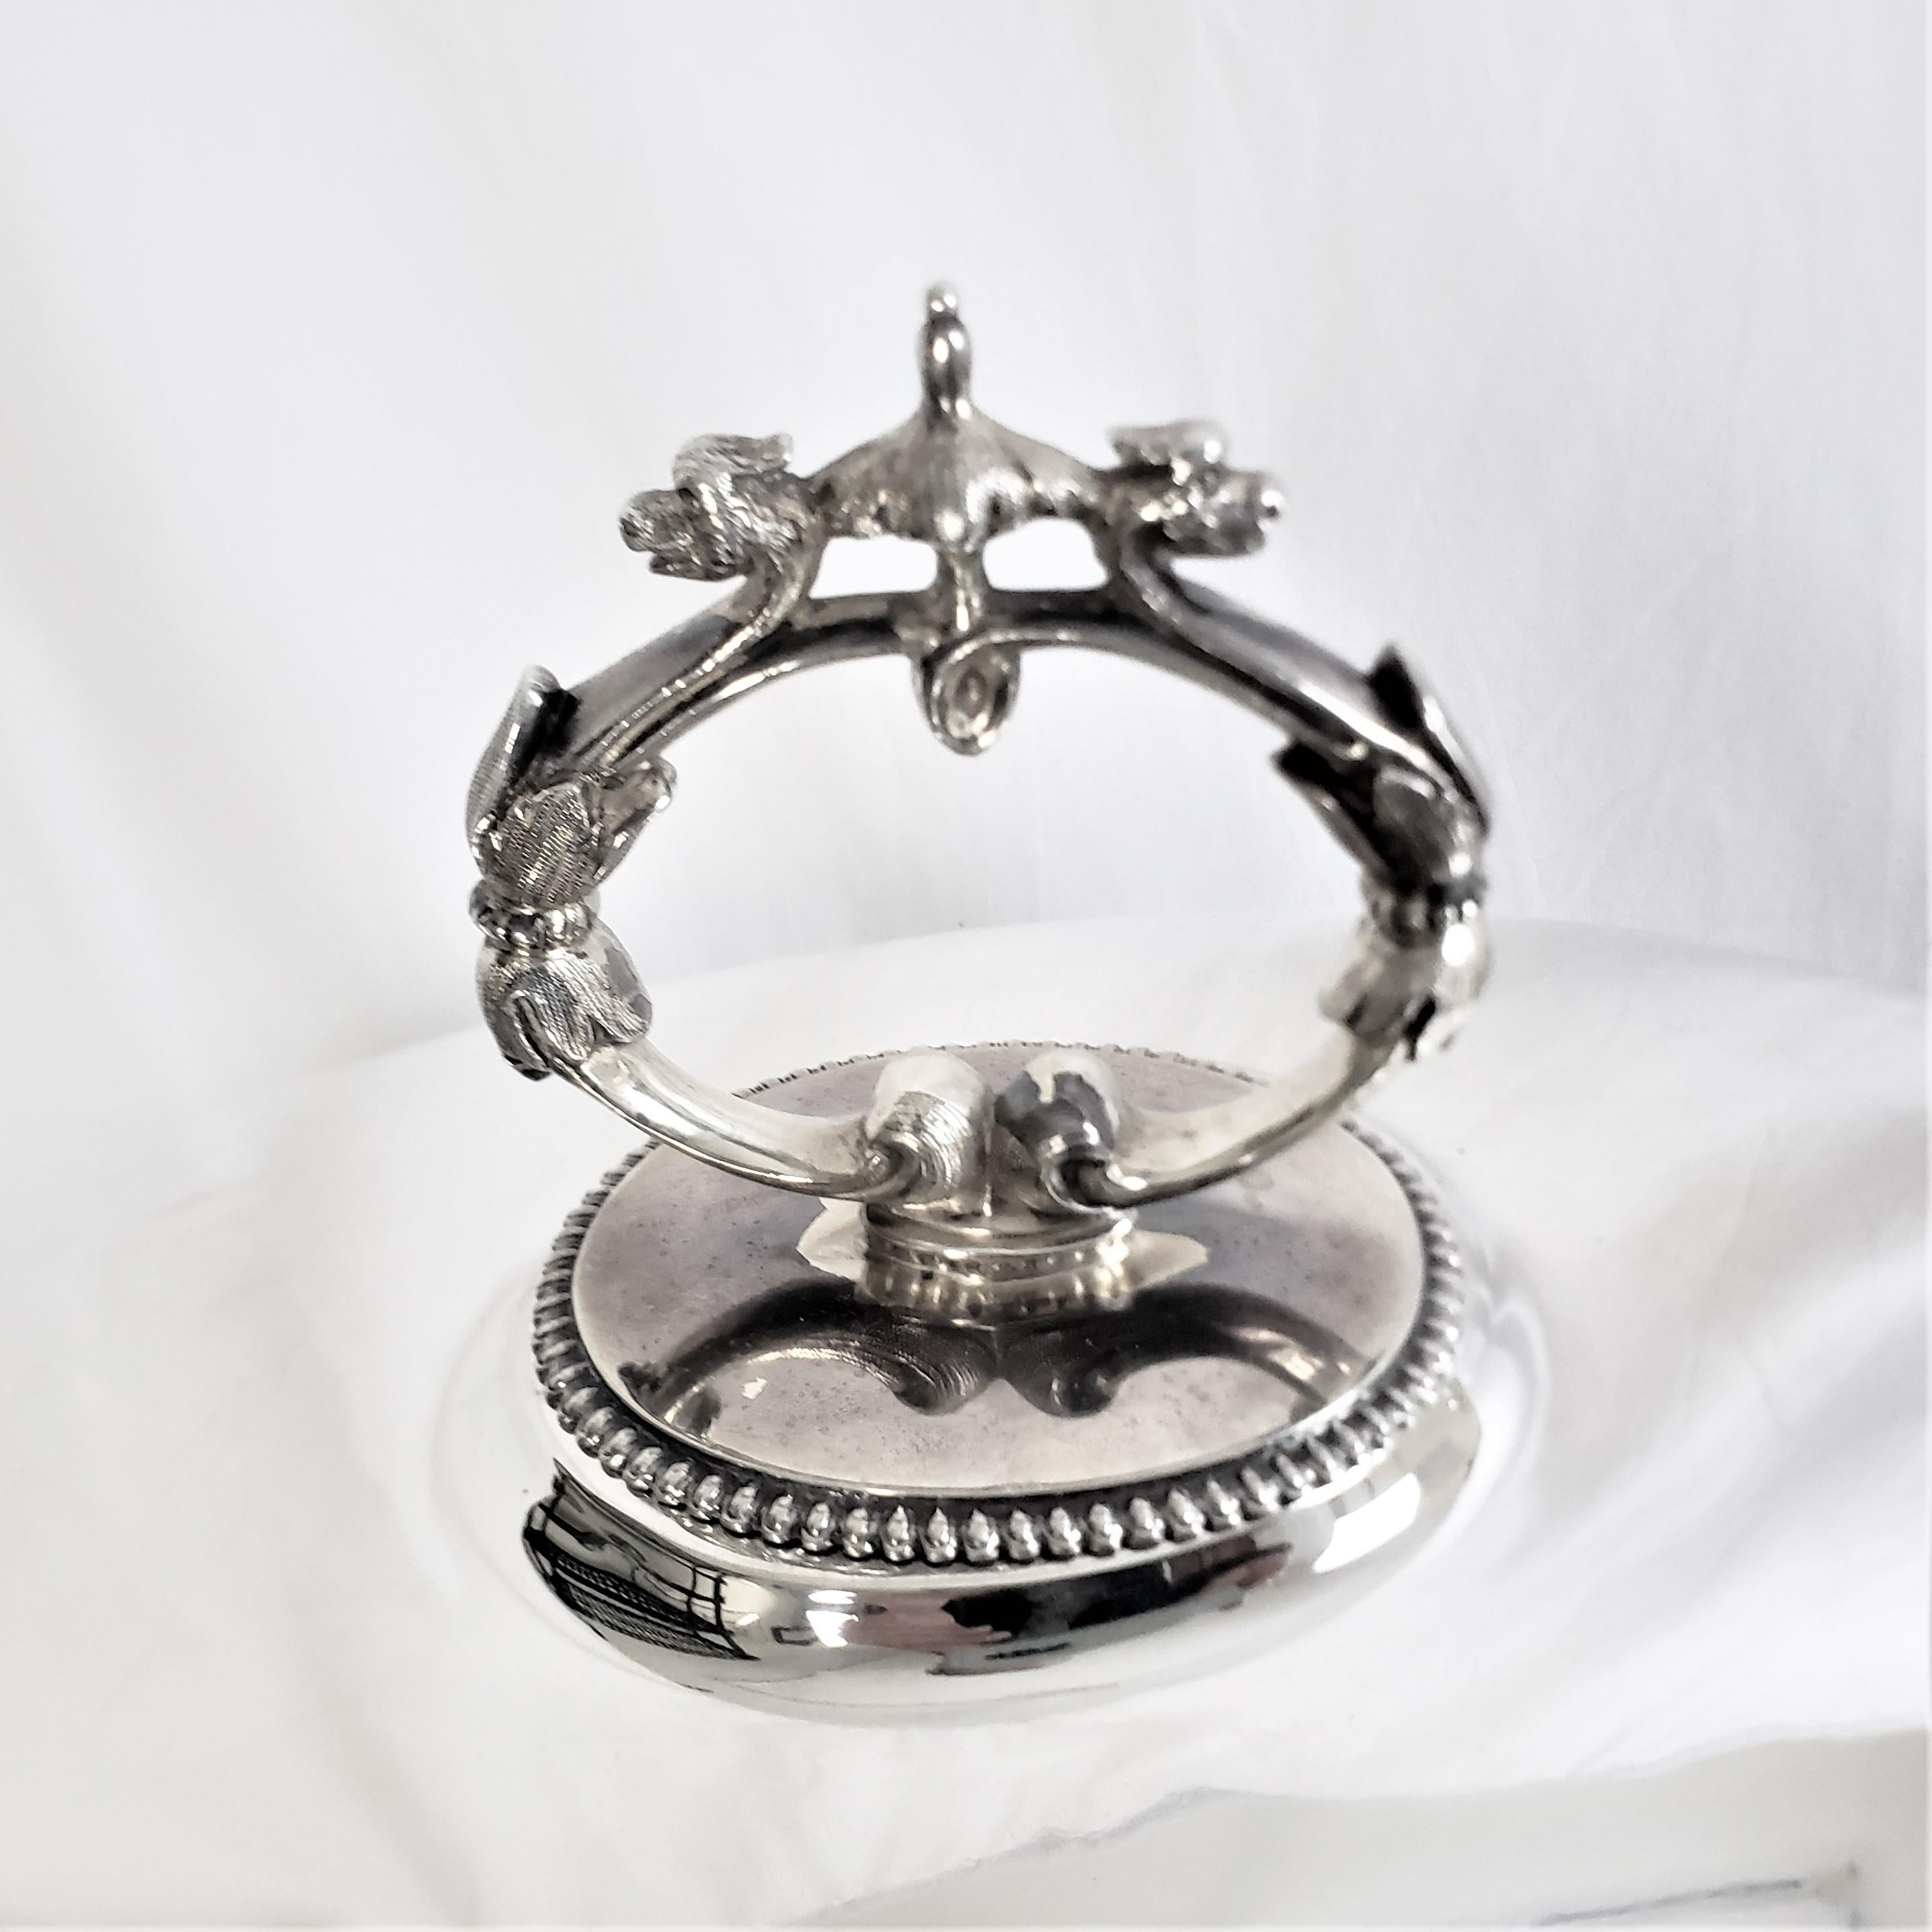 Antique Hand-Crafted & Silver Plated Graduated Meat Dome or Entre Cover Set In Good Condition For Sale In Hamilton, Ontario